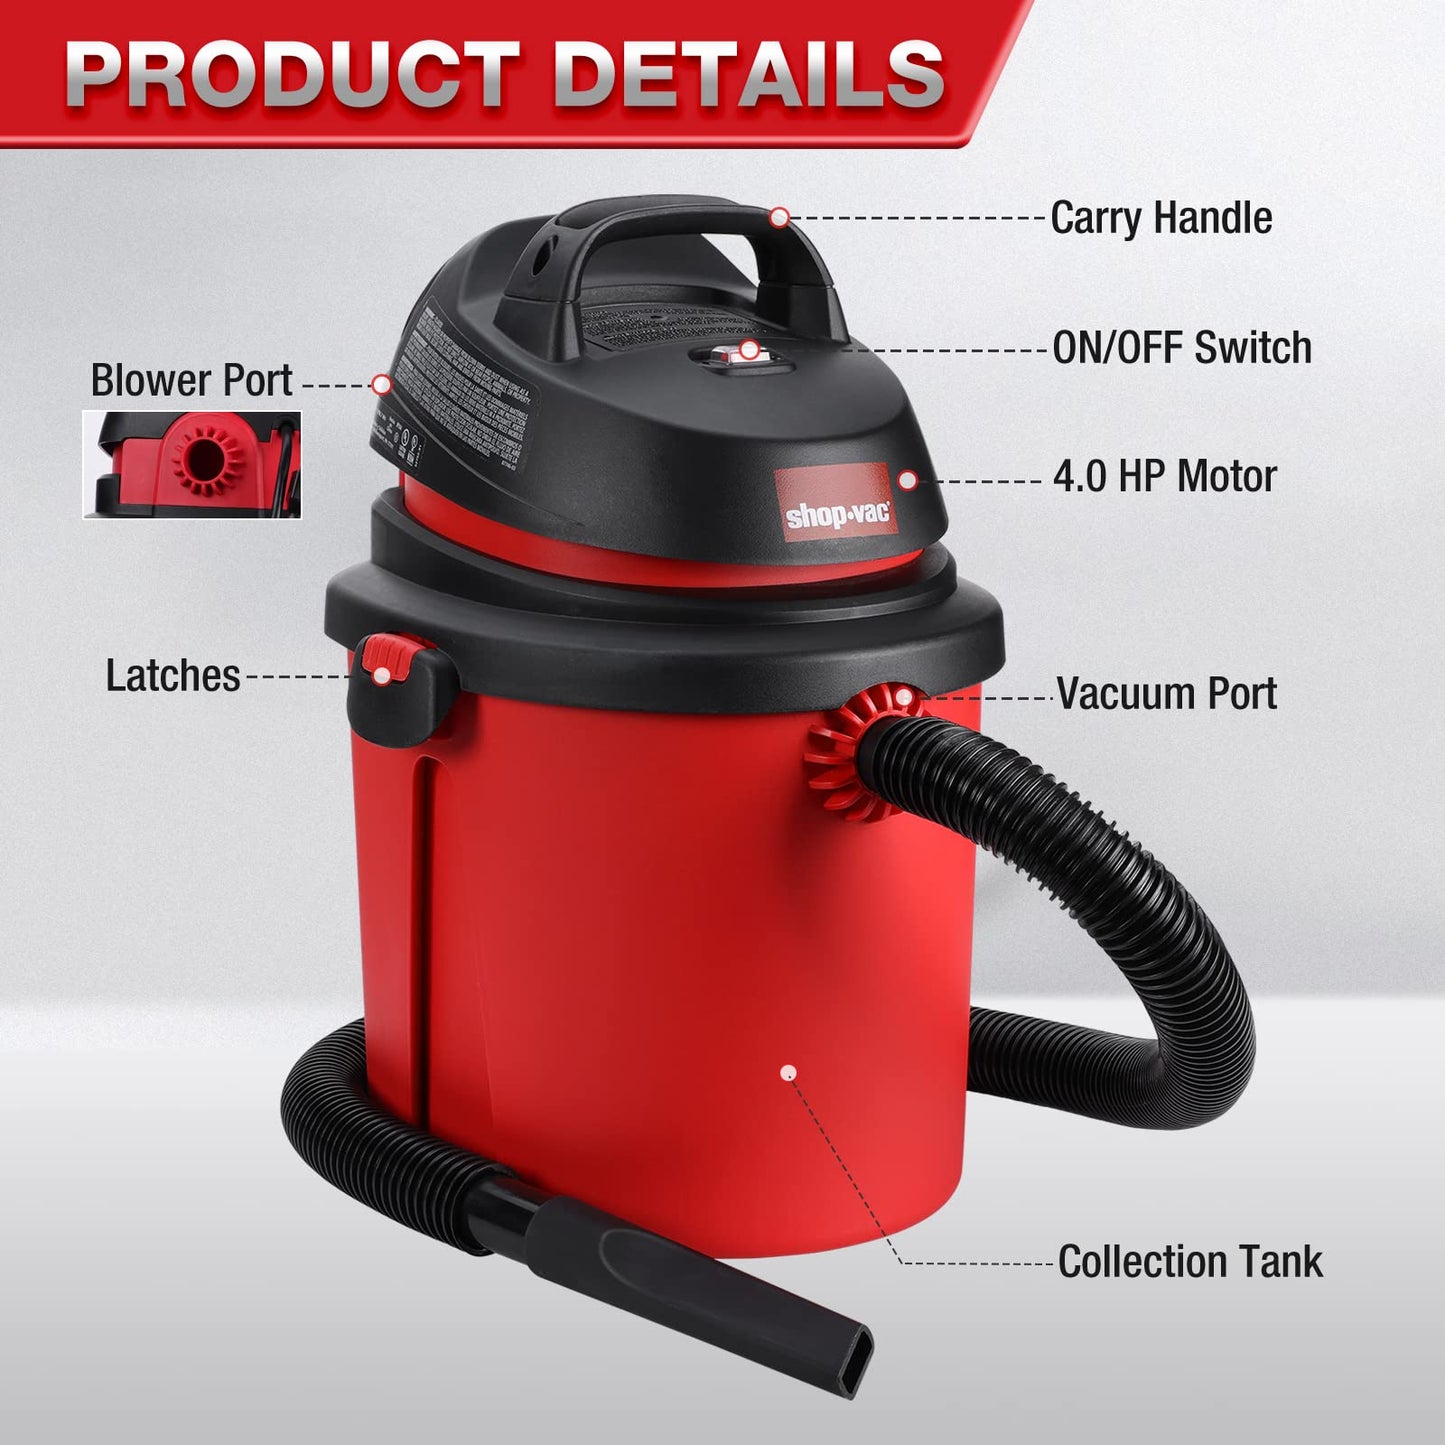 Shop-Vac 4 Gallon 4.0 Peak HP Wet/Dry Vacuum, Portable Compact Shop Vacuum with Tool Holder, Wall Bracket & Attachments, Ideal for Home, Jobsite,